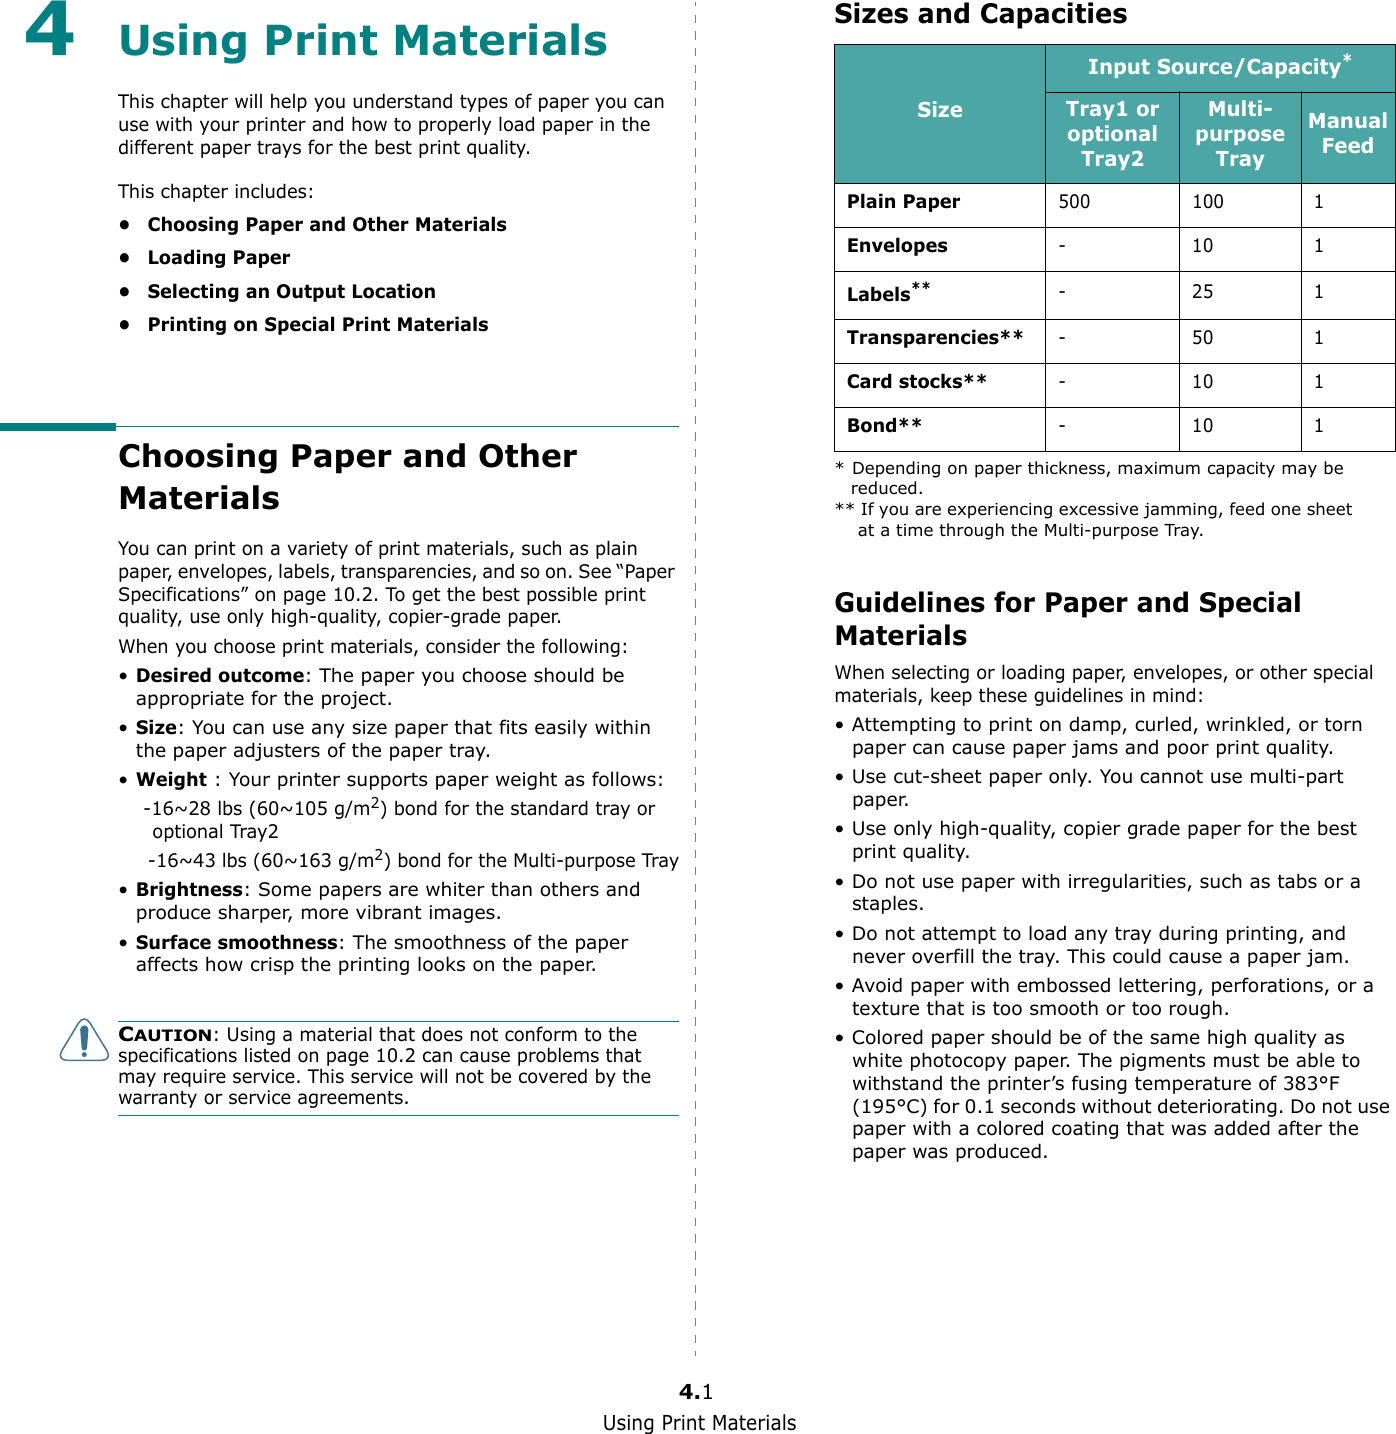 Using Print Materials4.14Using Print MaterialsThis chapter will help you understand types of paper you can use with your printer and how to properly load paper in the different paper trays for the best print quality. This chapter includes:• Choosing Paper and Other Materials•Loading Paper• Selecting an Output Location• Printing on Special Print MaterialsChoosing Paper and Other MaterialsYou can print on a variety of print materials, such as plain paper, envelopes, labels, transparencies, and so on. See “Paper Specifications” on page 10.2. To get the best possible print quality, use only high-quality, copier-grade paper.When you choose print materials, consider the following:•Desired outcome: The paper you choose should be appropriate for the project.•Size: You can use any size paper that fits easily within the paper adjusters of the paper tray.•Weight : Your printer supports paper weight as follows:    -16~28 lbs (60~105 g/m2) bond for the standard tray or optional Tray2     -16~43 lbs (60~163 g/m2) bond for the Multi-purpose Tray•Brightness: Some papers are whiter than others and produce sharper, more vibrant images. •Surface smoothness: The smoothness of the paper affects how crisp the printing looks on the paper.CAUTION: Using a material that does not conform to the specifications listed on page 10.2 can cause problems that may require service. This service will not be covered by the warranty or service agreements.Sizes and CapacitiesGuidelines for Paper and Special MaterialsWhen selecting or loading paper, envelopes, or other special materials, keep these guidelines in mind:• Attempting to print on damp, curled, wrinkled, or torn paper can cause paper jams and poor print quality.• Use cut-sheet paper only. You cannot use multi-part paper.• Use only high-quality, copier grade paper for the best print quality. • Do not use paper with irregularities, such as tabs or a staples.• Do not attempt to load any tray during printing, and never overfill the tray. This could cause a paper jam.• Avoid paper with embossed lettering, perforations, or a texture that is too smooth or too rough.• Colored paper should be of the same high quality as white photocopy paper. The pigments must be able to withstand the printer’s fusing temperature of 383°F (195°C) for 0.1 seconds without deteriorating. Do not use paper with a colored coating that was added after the paper was produced.SizeInput Source/Capacity** Depending on paper thickness, maximum capacity may be reduced. Tray1 or optional Tray2Multi-purpose TrayManual FeedPlain Paper 500 100 1Envelopes-101Labels**** If you are experiencing excessive jamming, feed one sheet at a time through the Multi-purpose Tray.-251Transparencies**-501Card stocks**-101Bond**-101